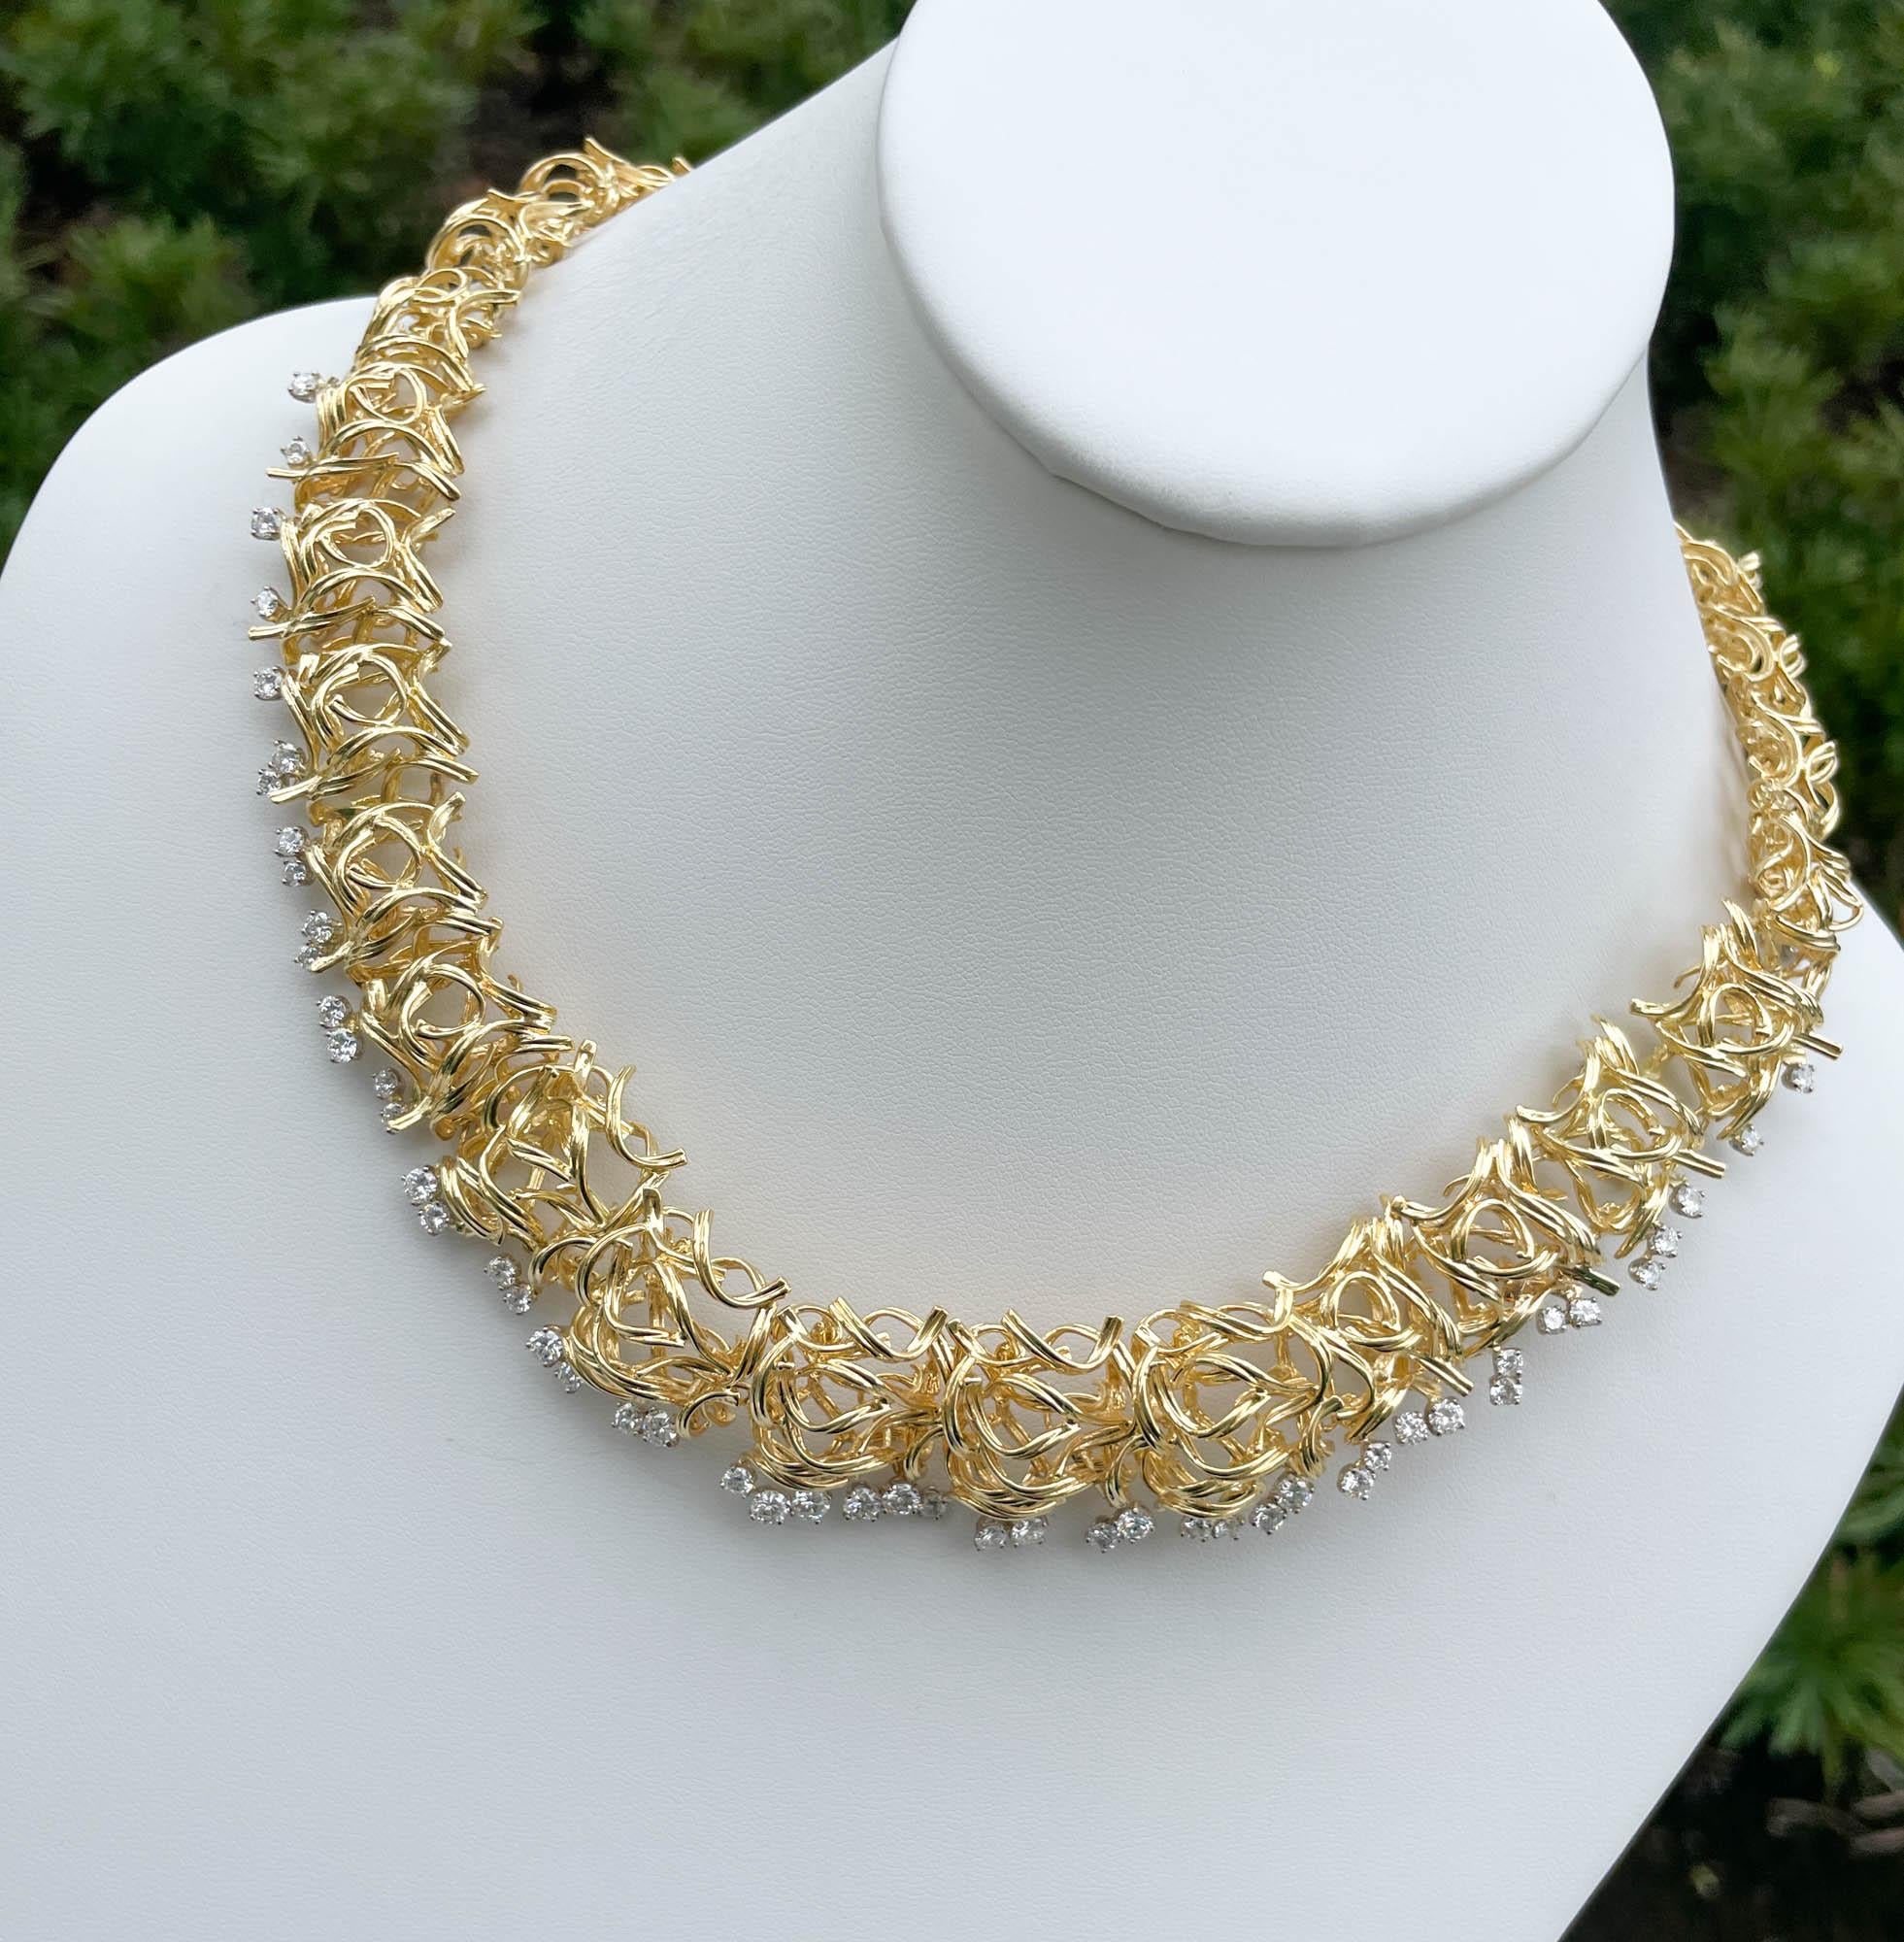 Jay Feder 18k Yellow Gold Diamond Filigree Branch Necklace
There are 52 round brilliant diamonds; estimated total weight is 4.00 carats. 
The necklace is 18.5 inches long and width tapers from 12mm at the clasp to 25mm in the middle.
Total weight of